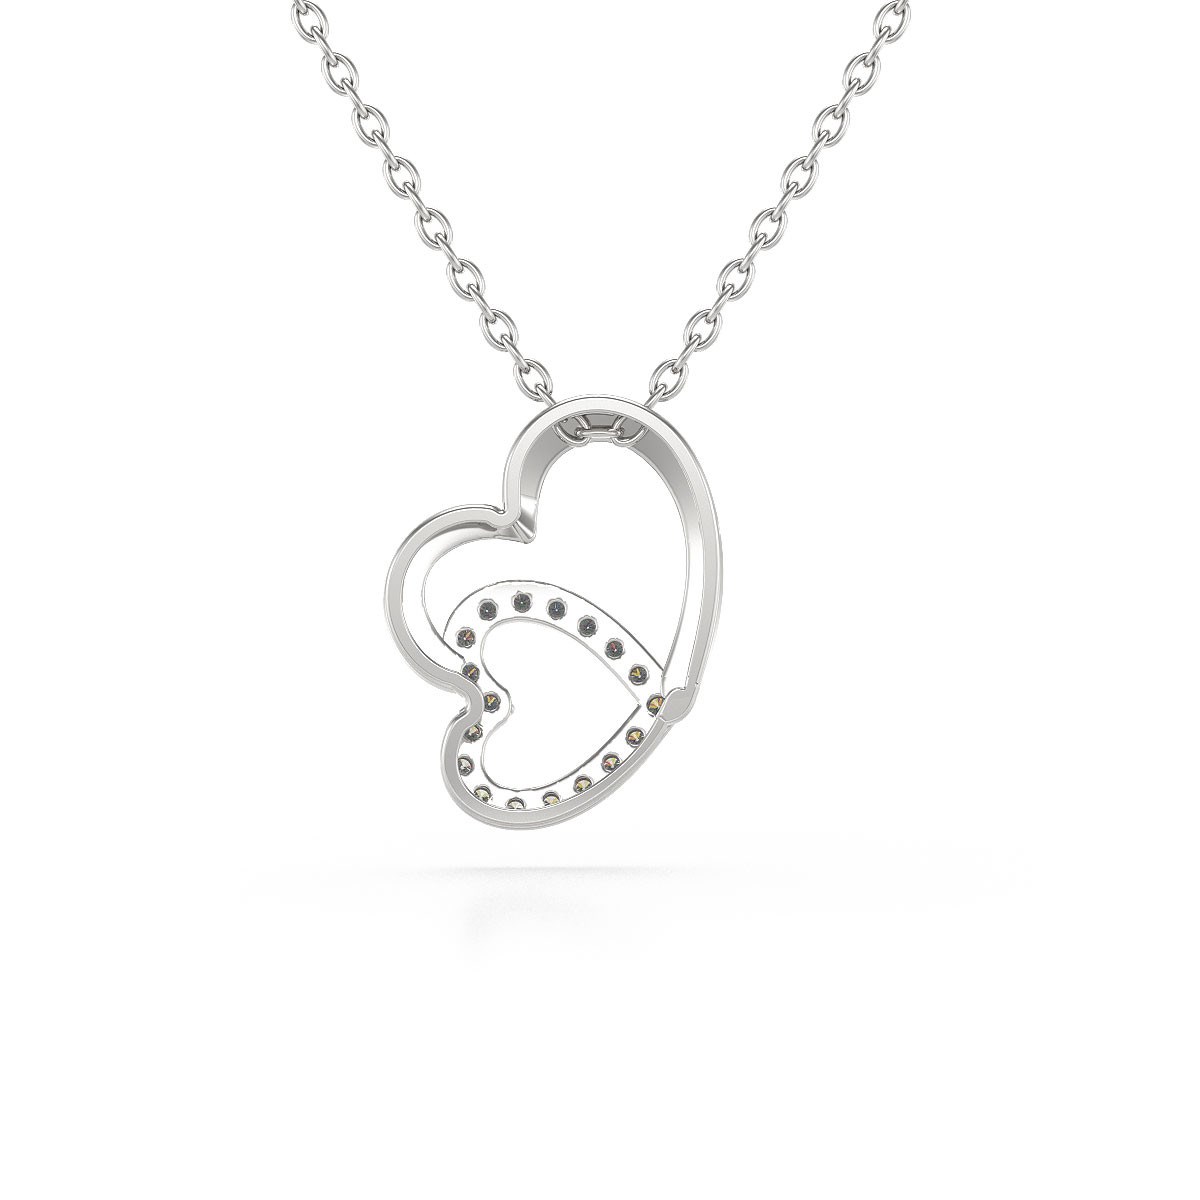 Collier Pendentif ADEN Double Coeur Or 585 Blanc Diamant Chaine Or incluse 1.09grs - vue 4